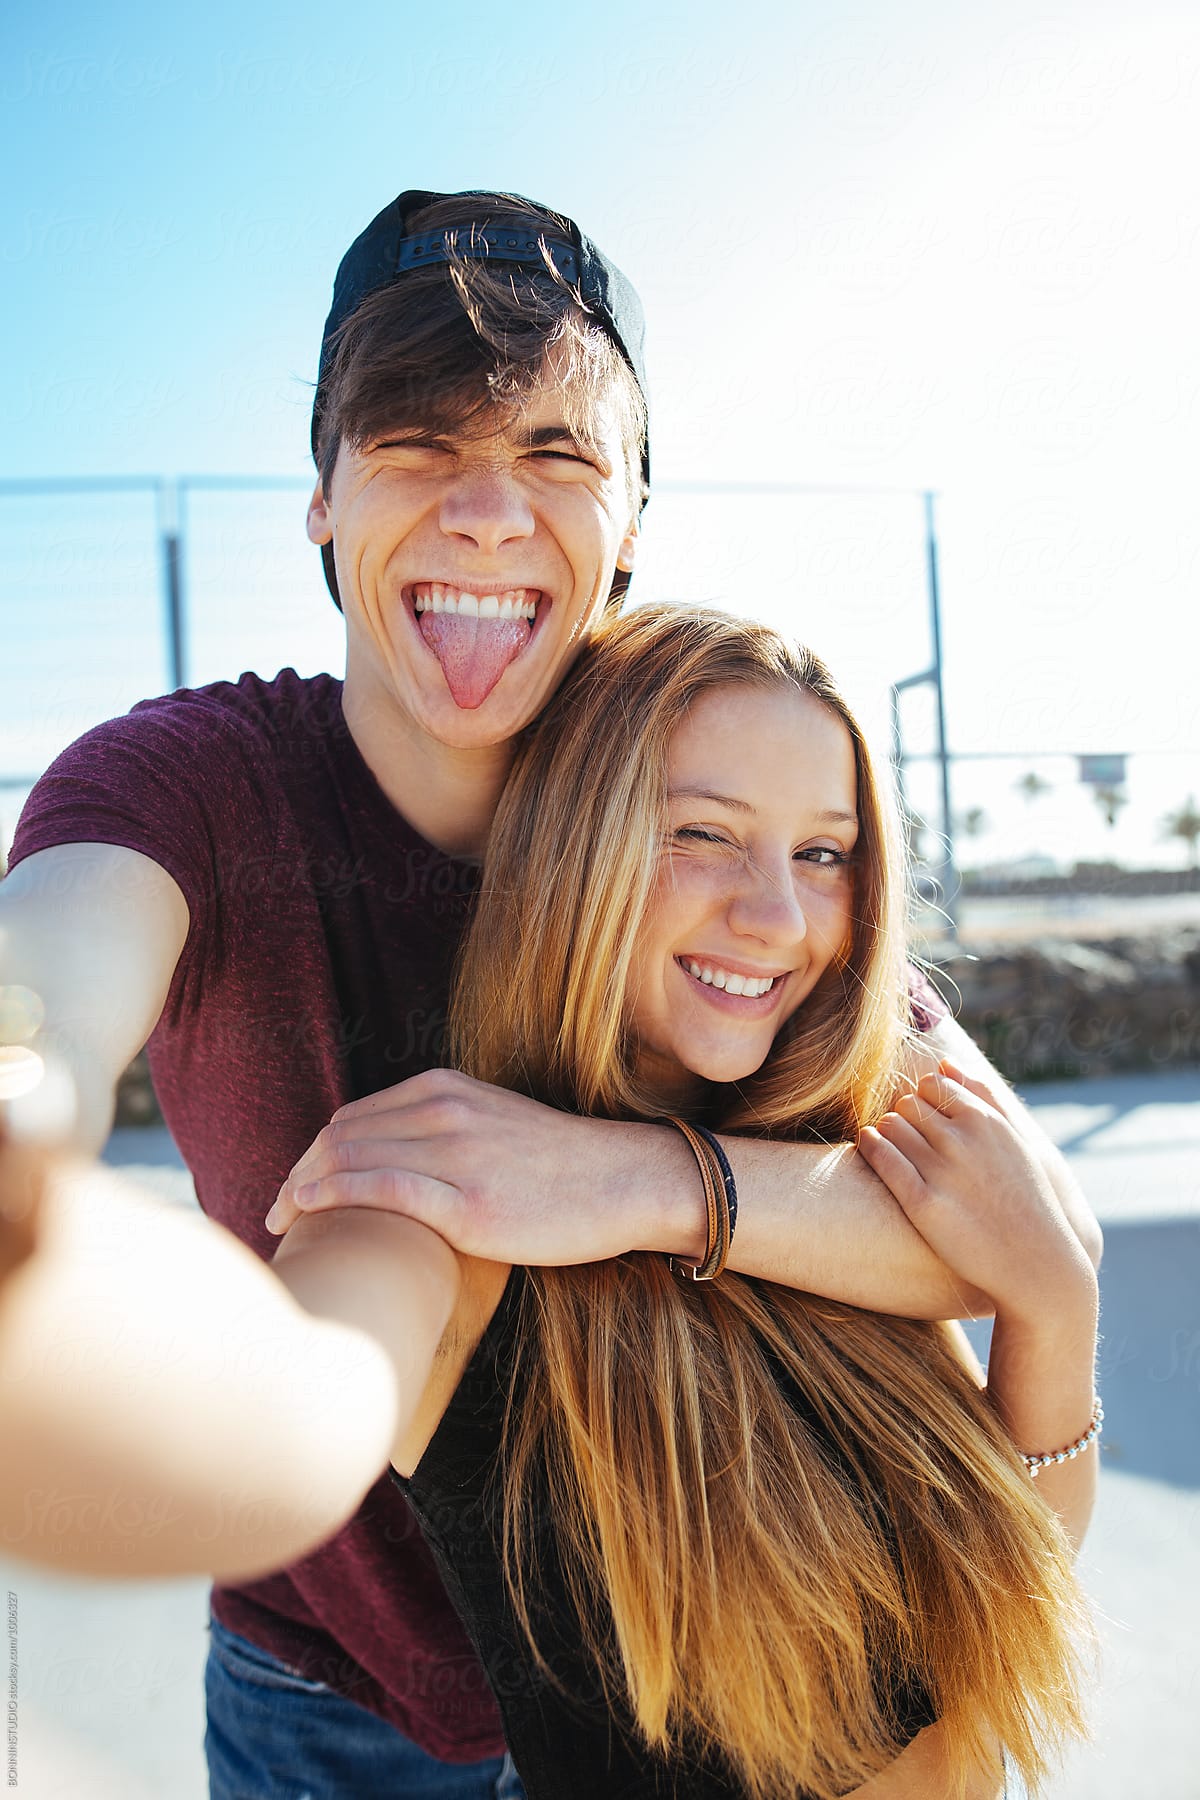 Funny Teenage Couple Making A Selfie In Summer.